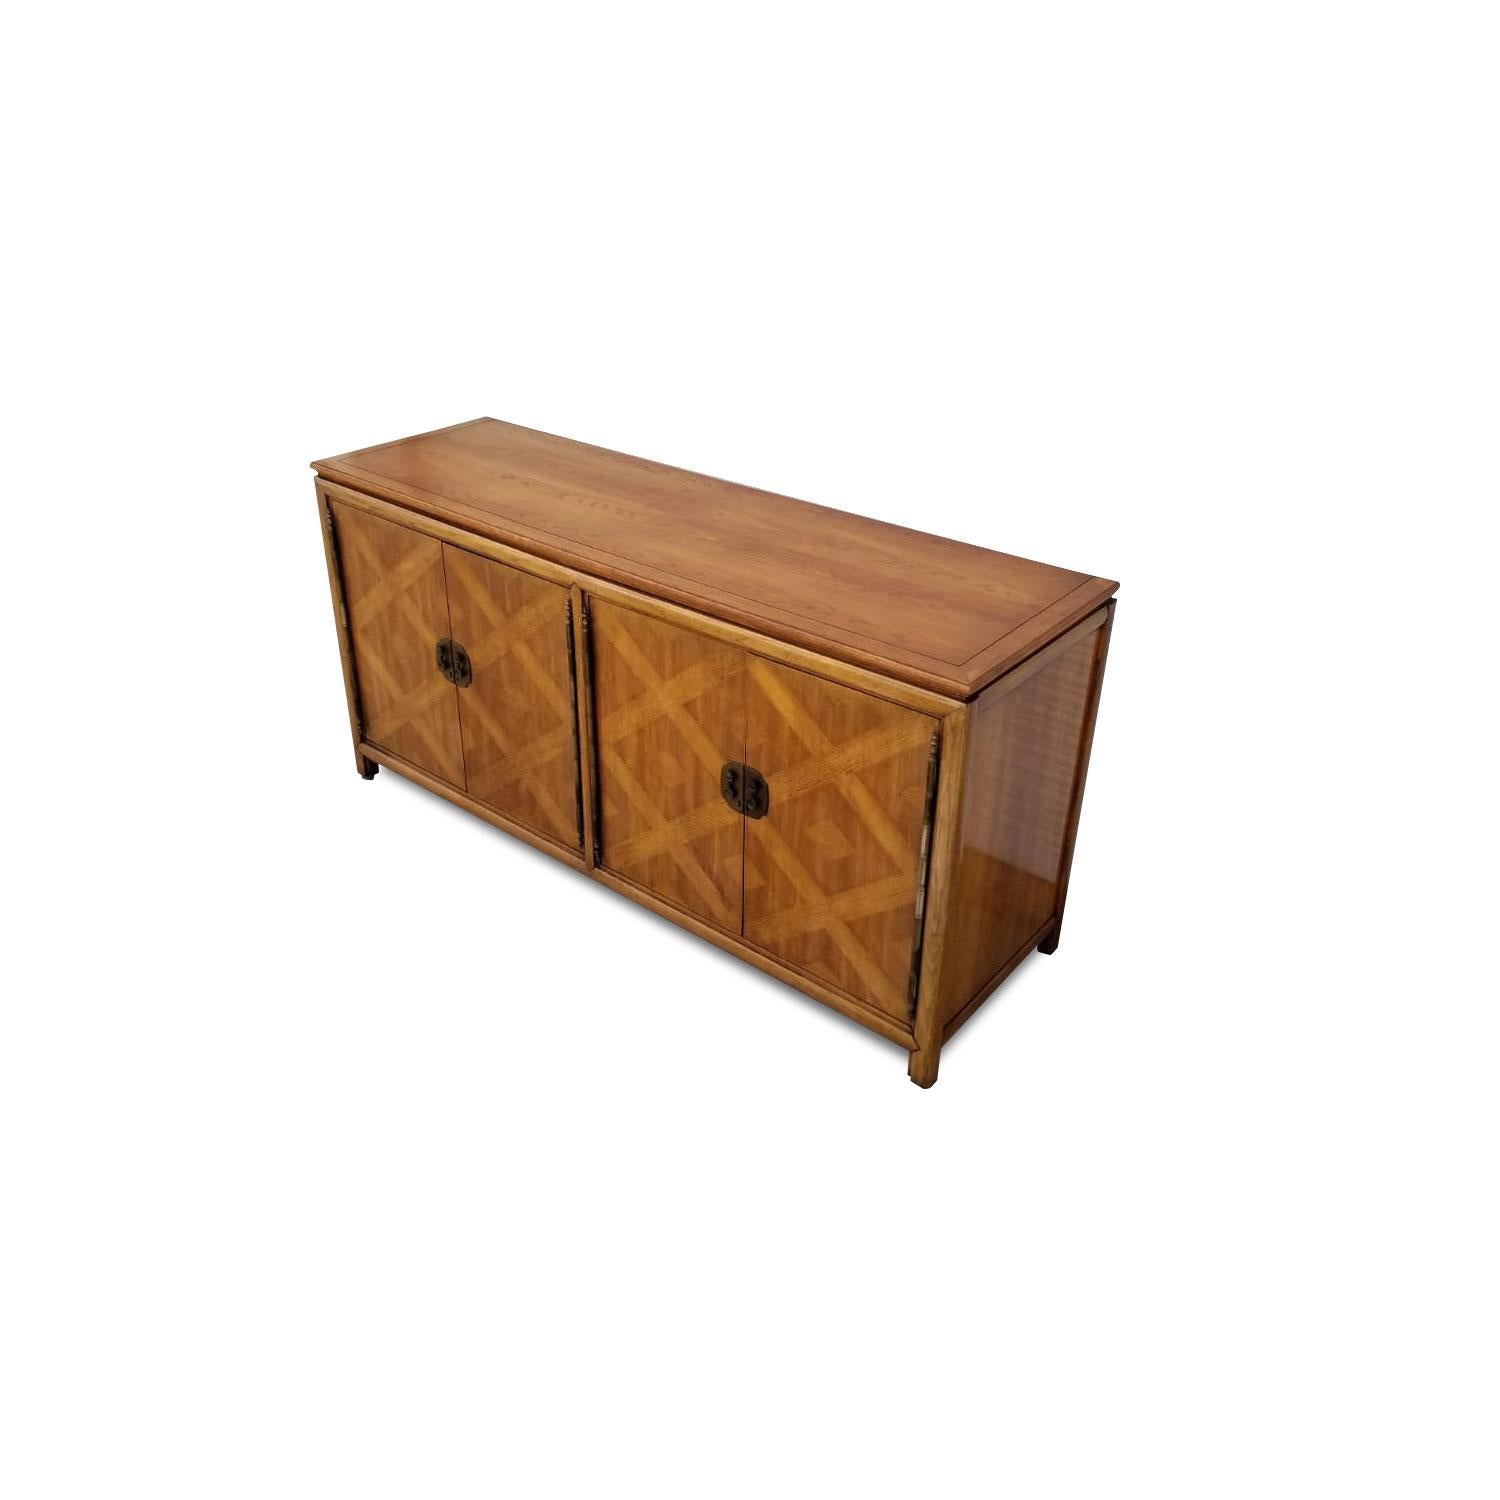 Exceptional styling on this vintage Hollywood Regency buffet. This distinctive sideboard is made of pecan wood. The facade is embellished with a handsome diamond pattern parquet. Bands of pecan wood intersect to create an argyle pattern with a